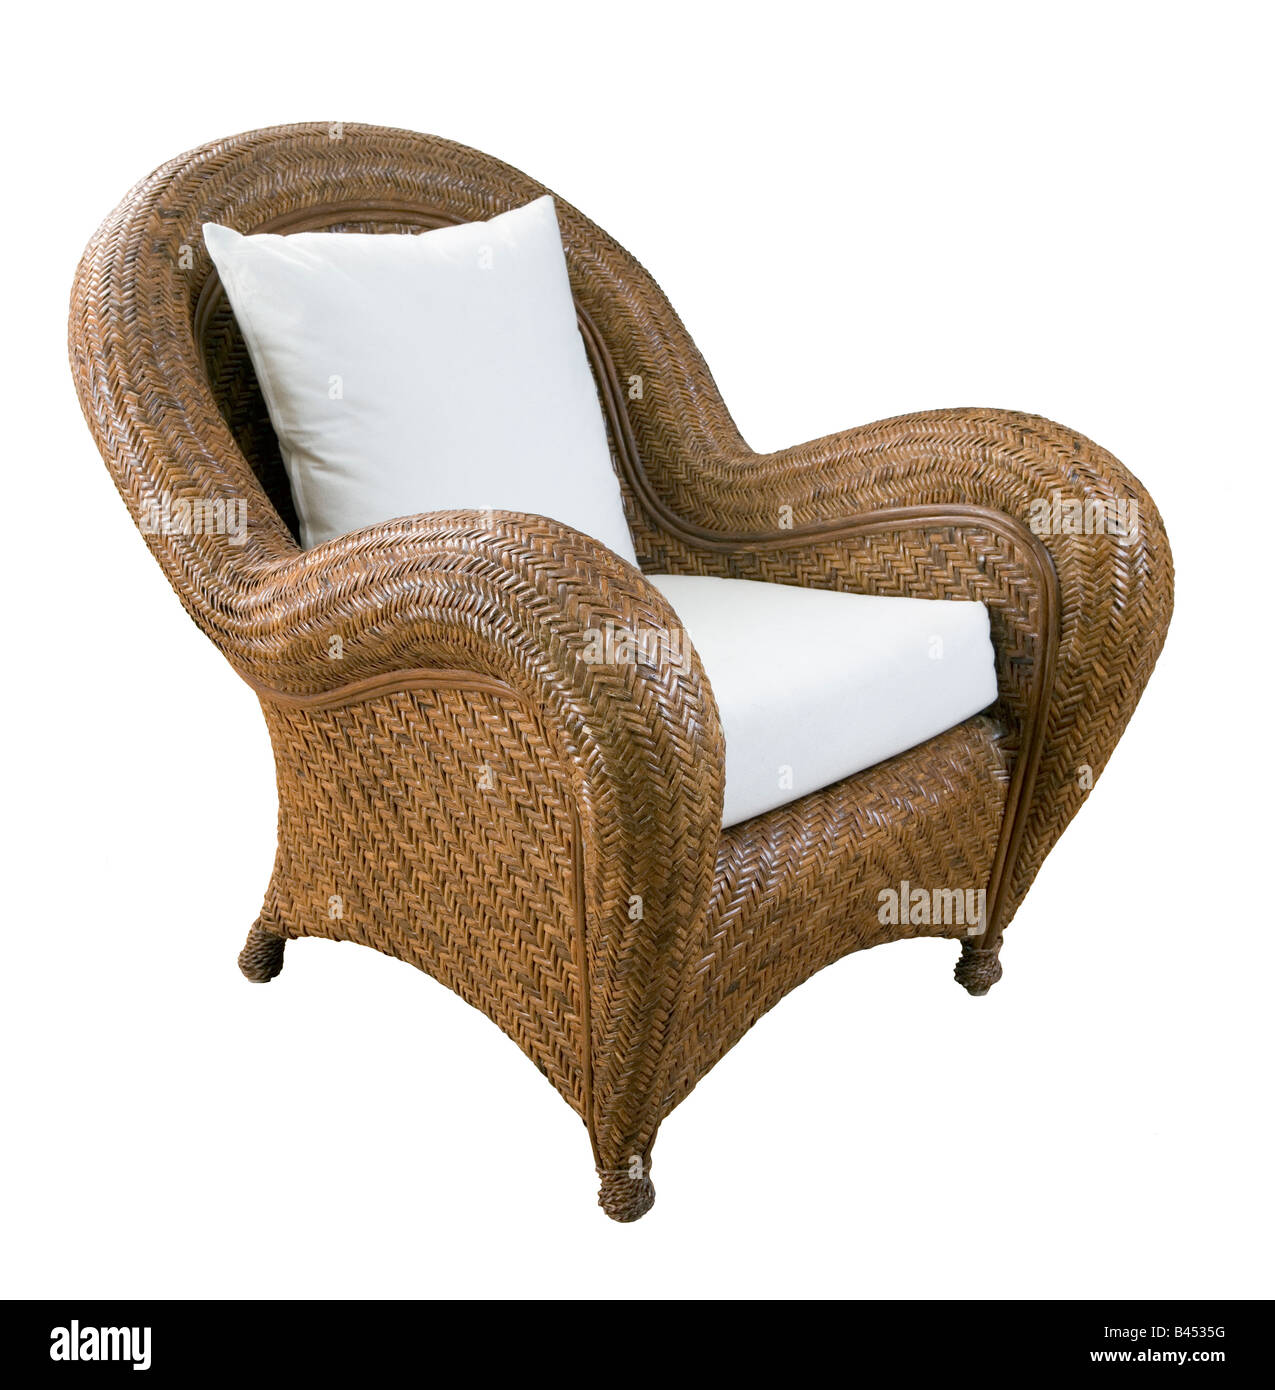 A large wicker chair with white cushions Stock Photo